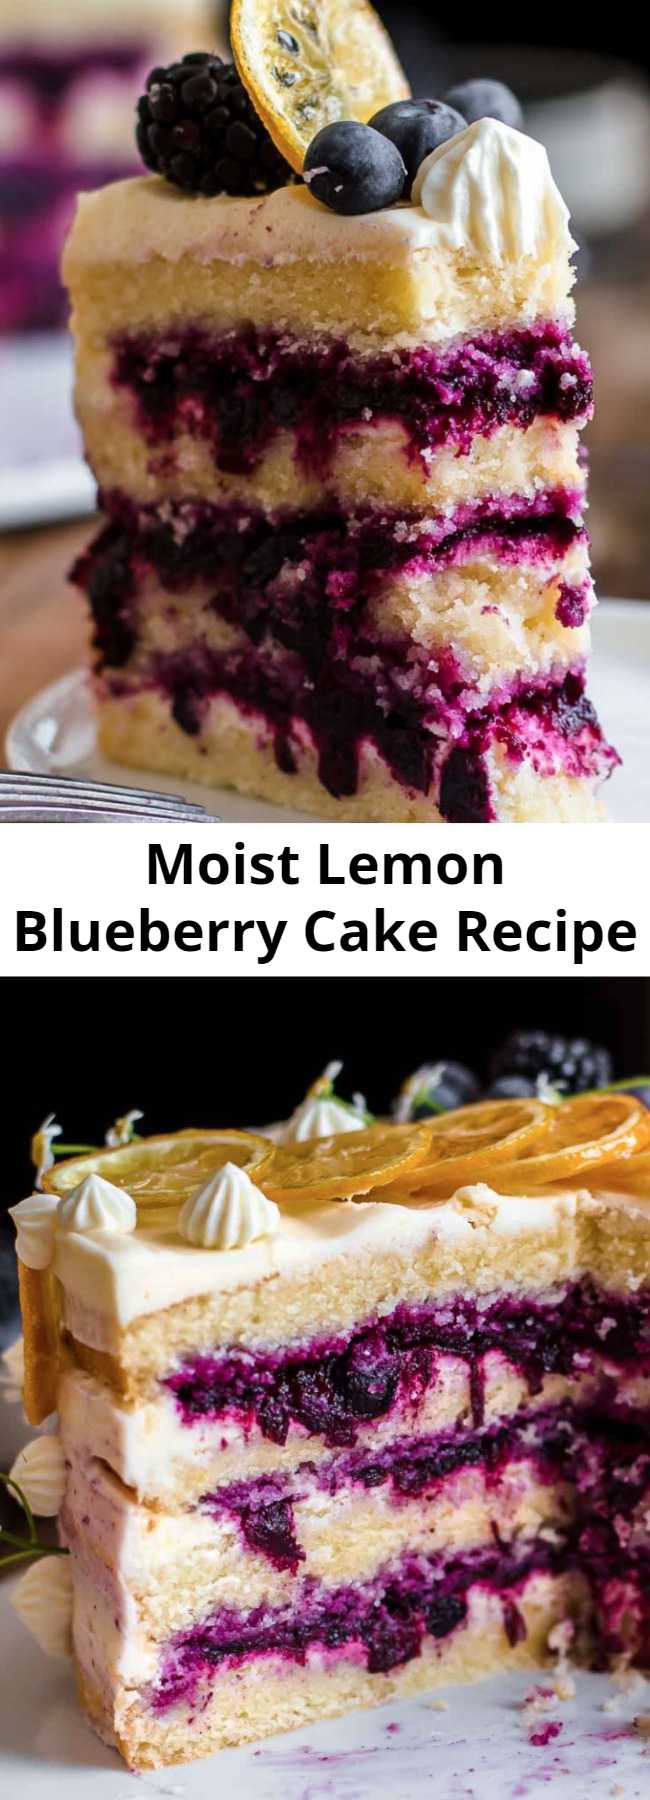 Super Moist Lemon Blueberry Cake Recipe - This Lemon Blueberry Cake is tangy, sweet, super moist, and creamy. It's a delicious and beautiful cake. It comes with soft lemon cake layers, a sweet blueberry filling, and an ultra creamy lemon cream cheese frosting. #lemon #blueberry #cake #creamcheesefrosting #baking #sweets #dessert